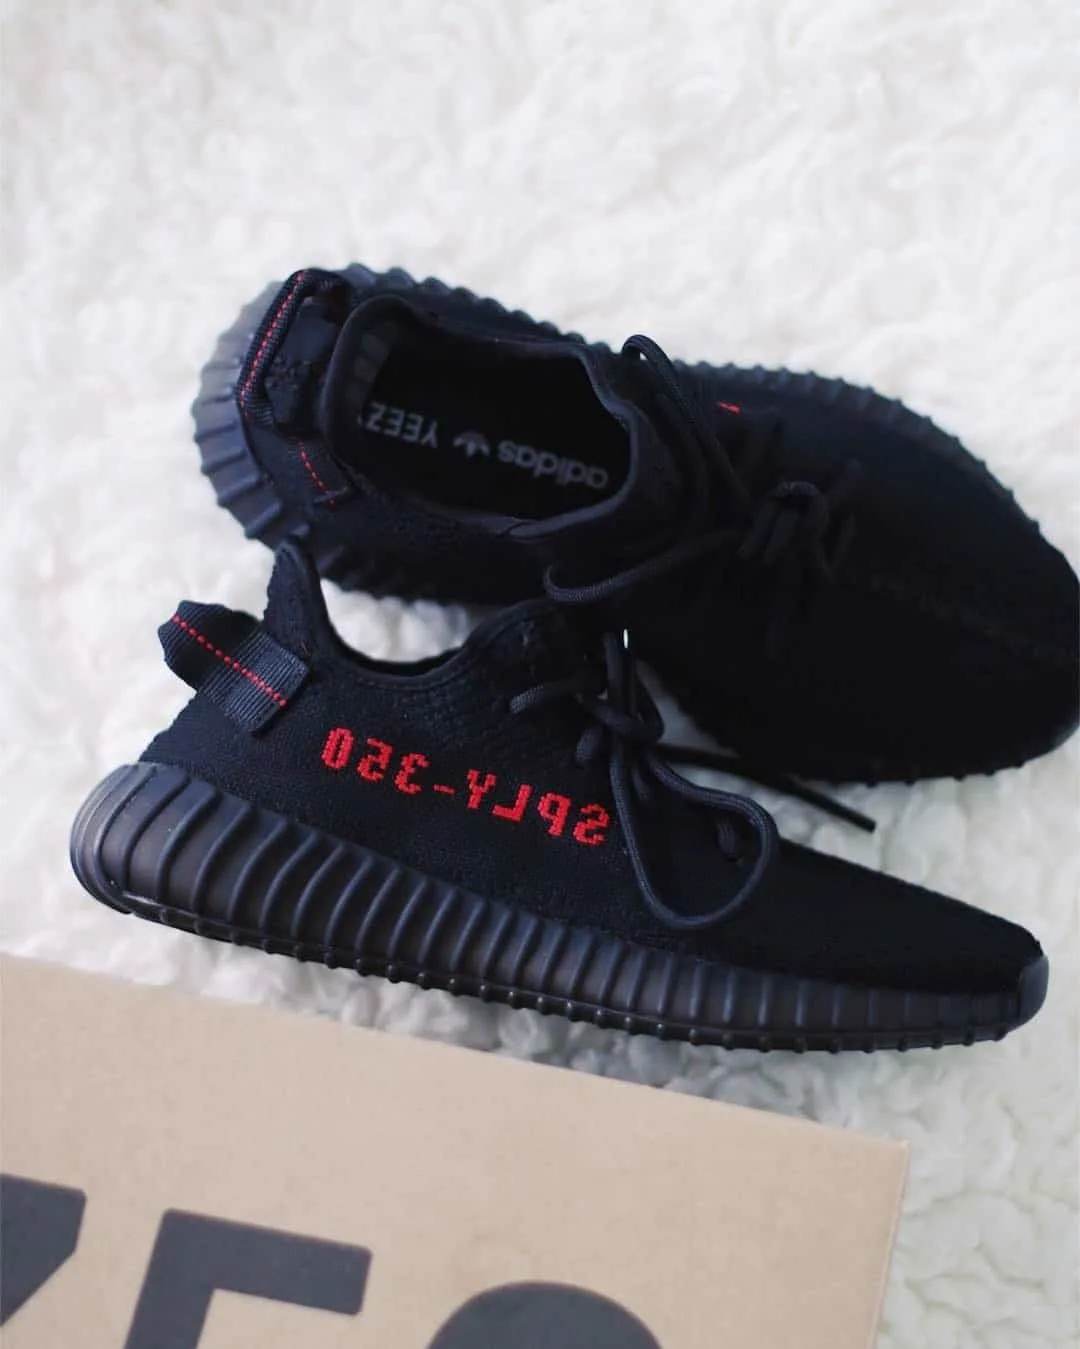 Adidas Yeezy Boost 350 v2 Bred Sneakers